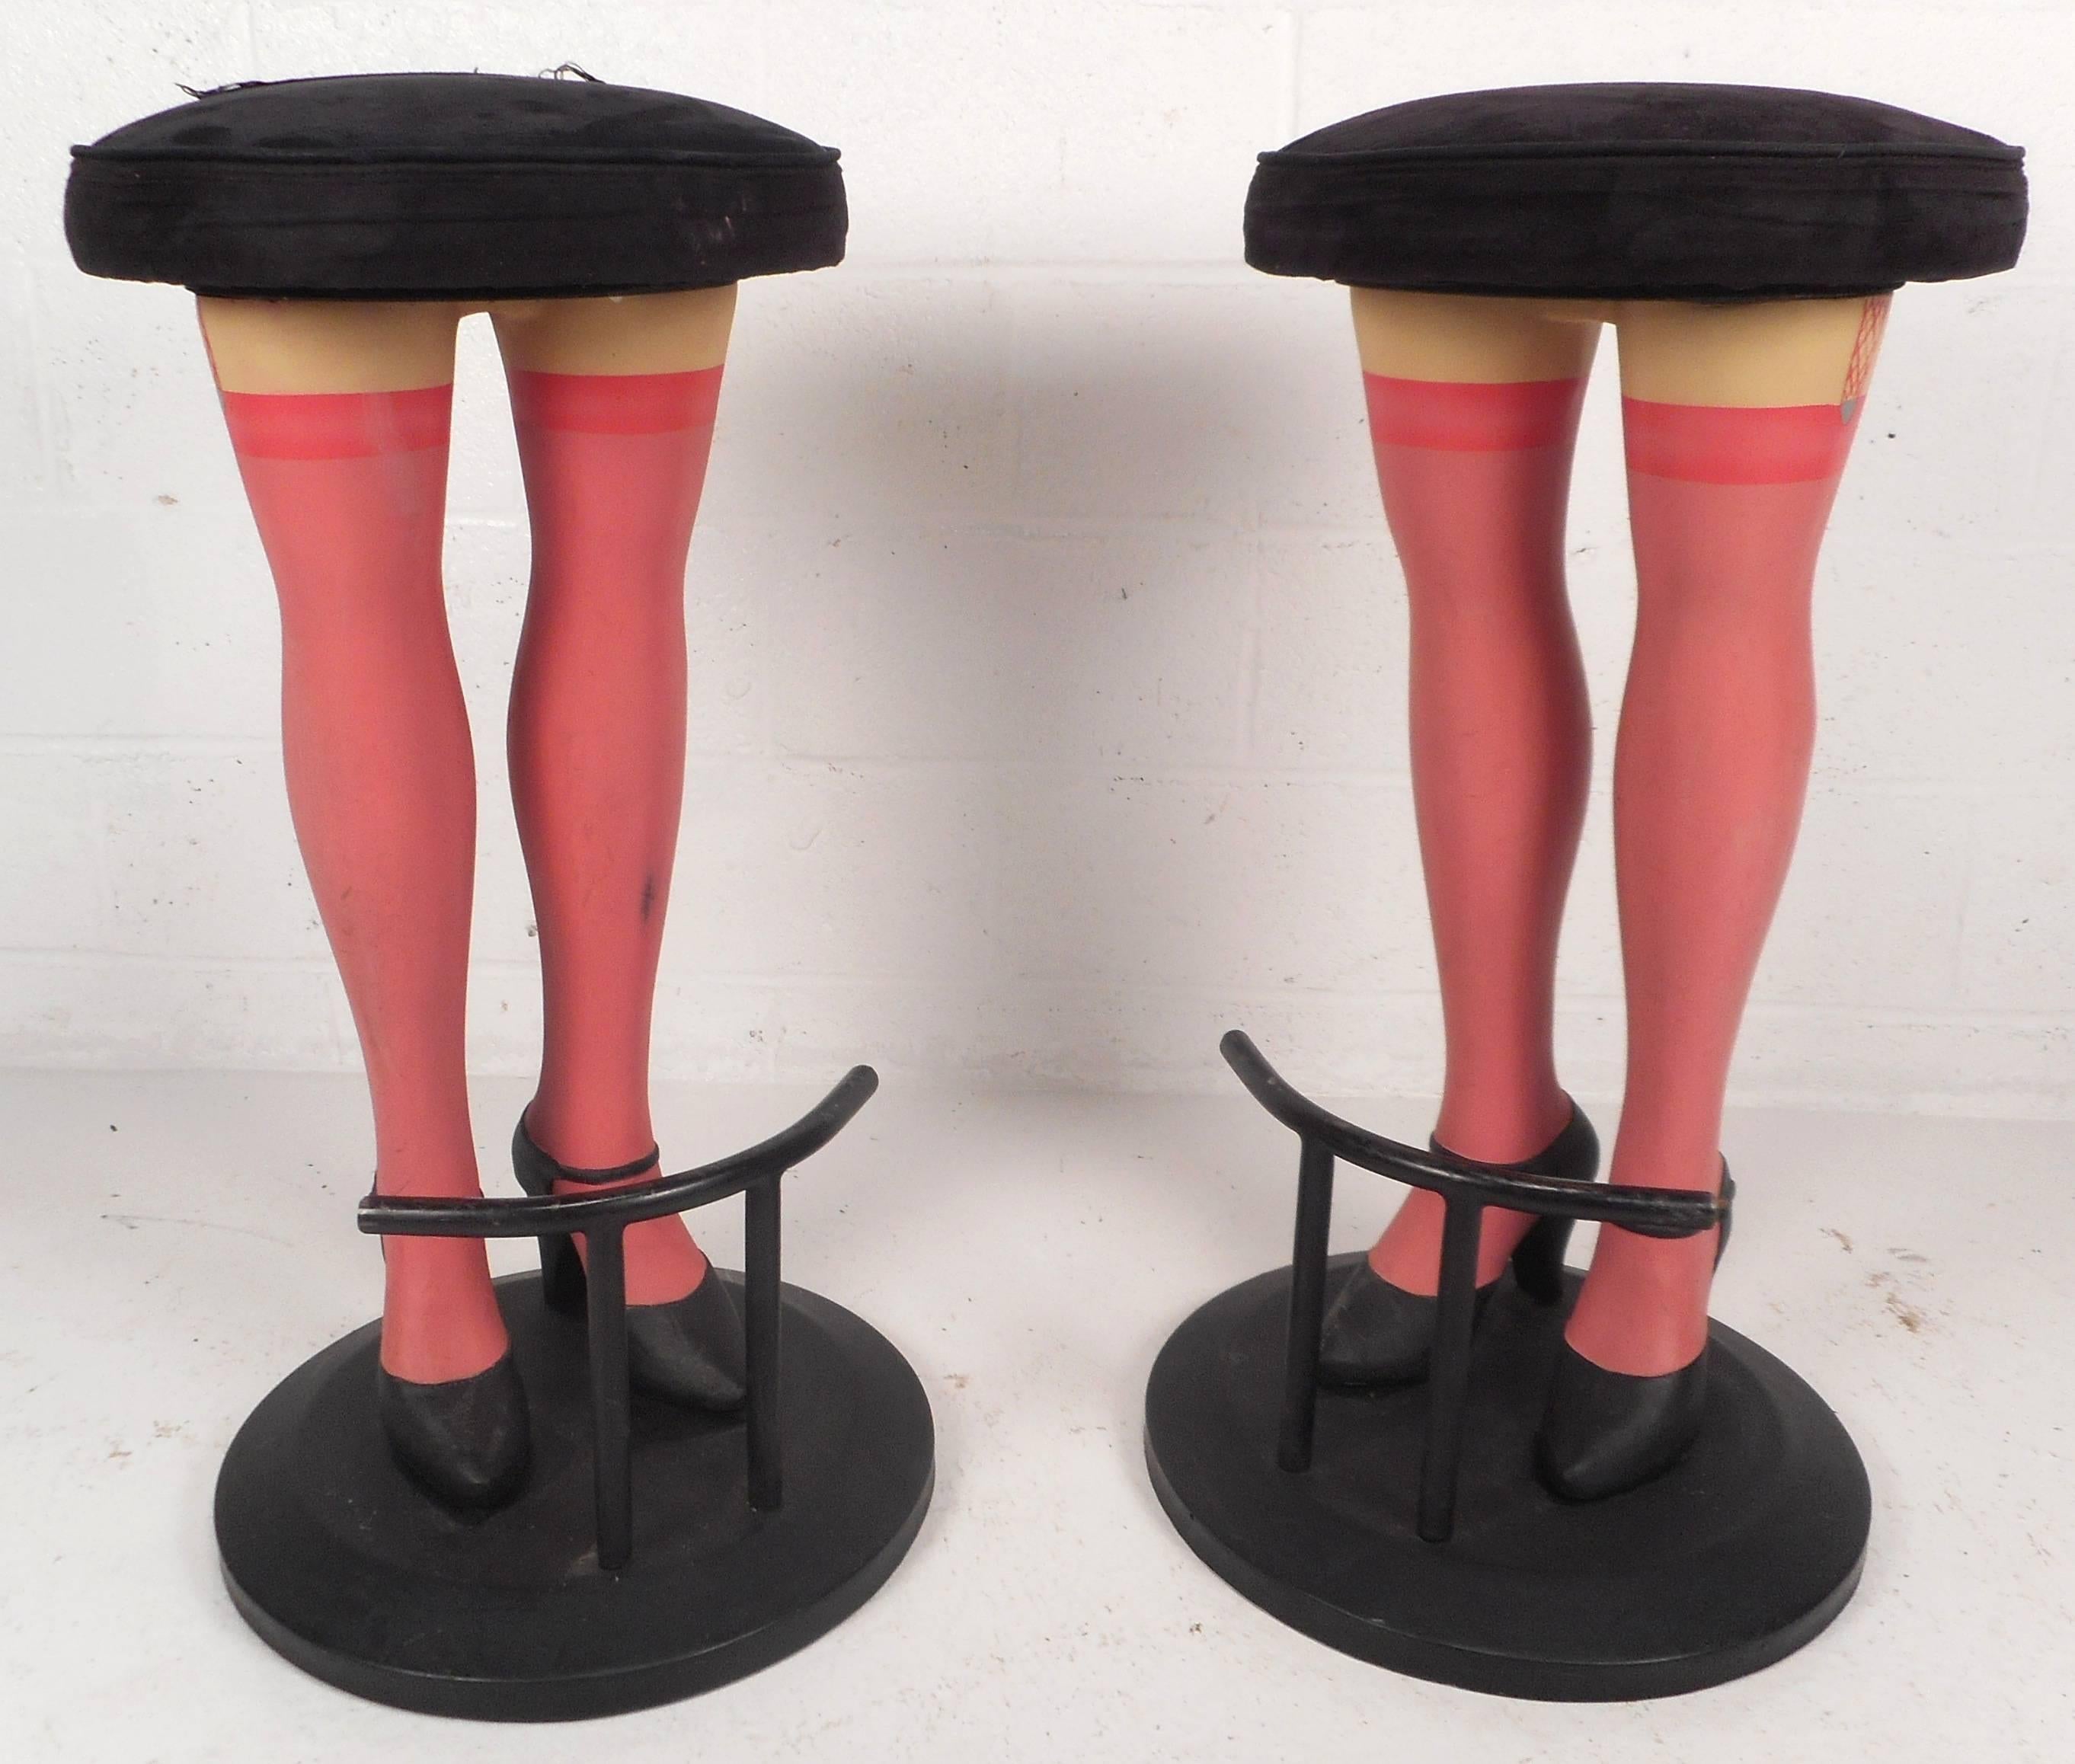 Unusual pair of contemporary modern bar stools feature legs wearing high heels with pink stockings. Incredibly detailed design with a kick rest, sturdy round base, and plush velvet upholstery. This beautiful pair of bar stools are sure to grab